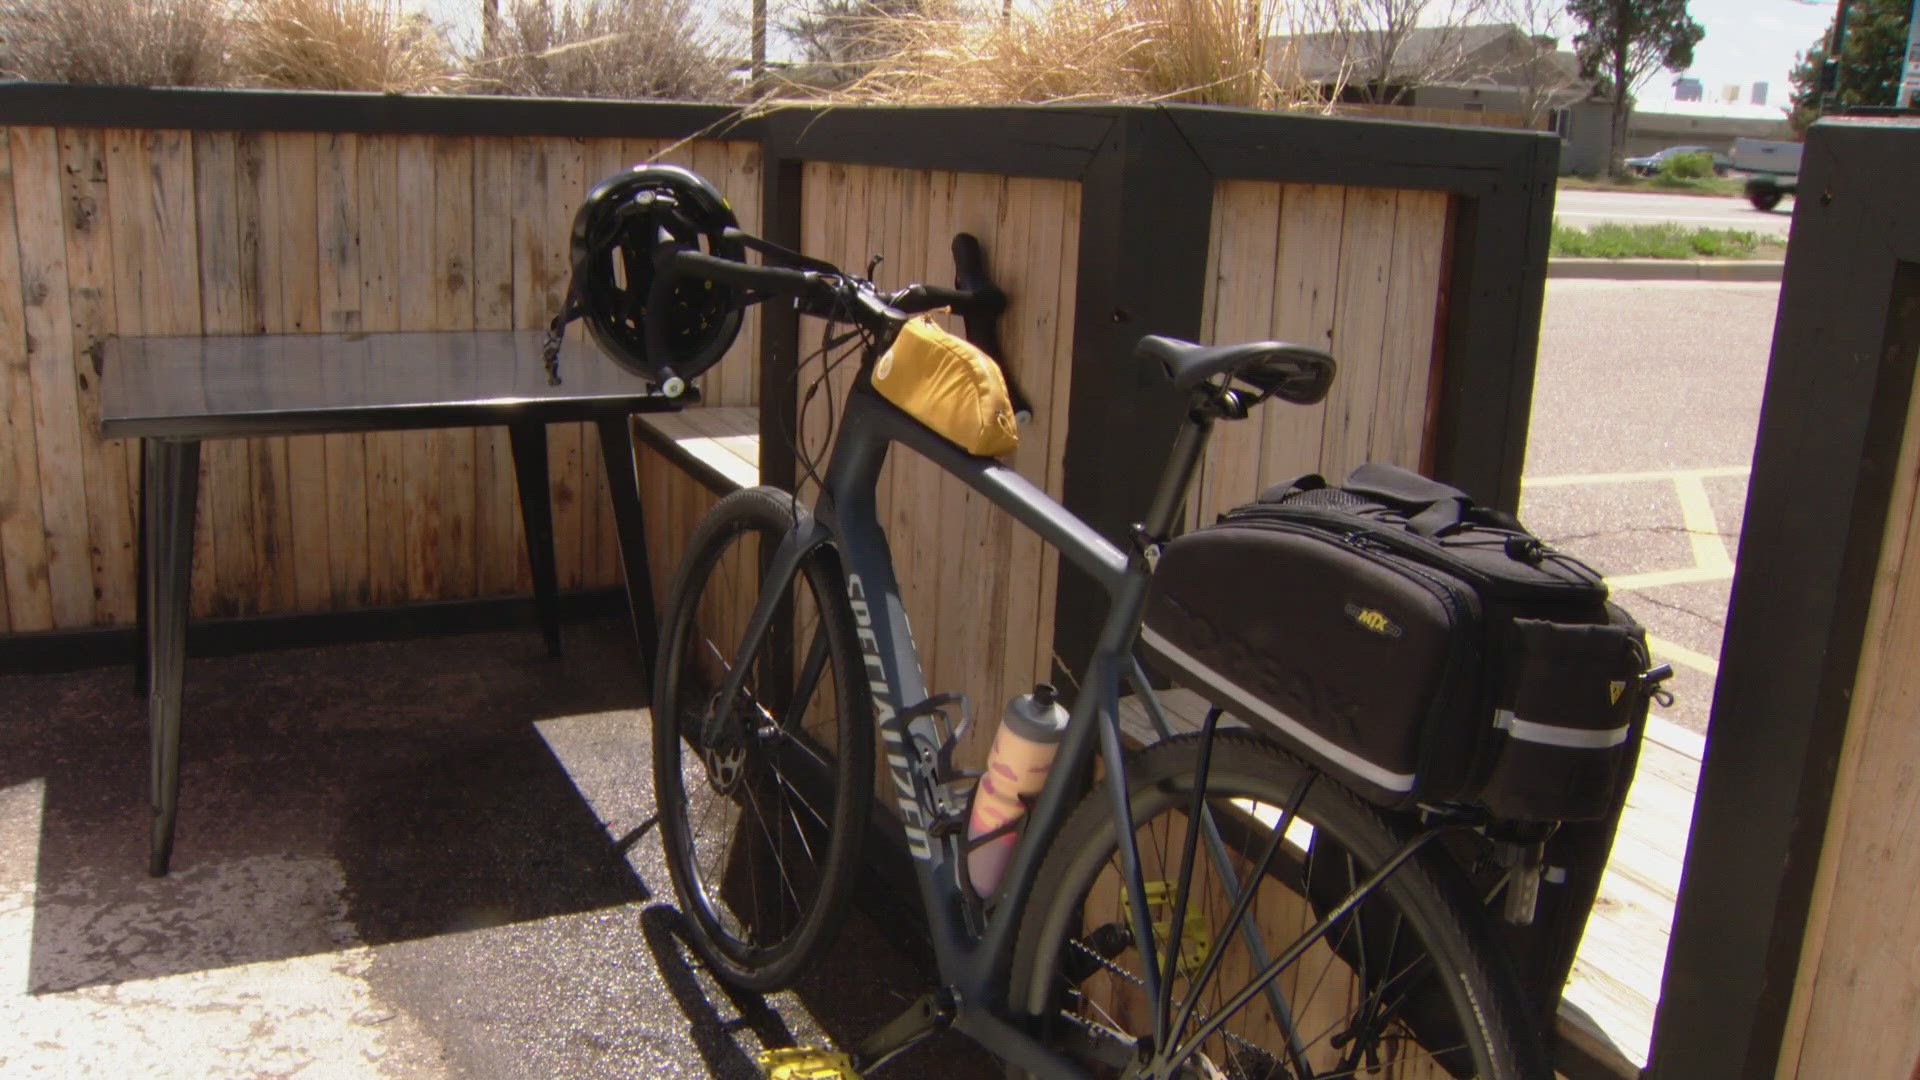 In Denver, it's pretty rare for someone to get their stolen bike back but one man used technology to track his bike.